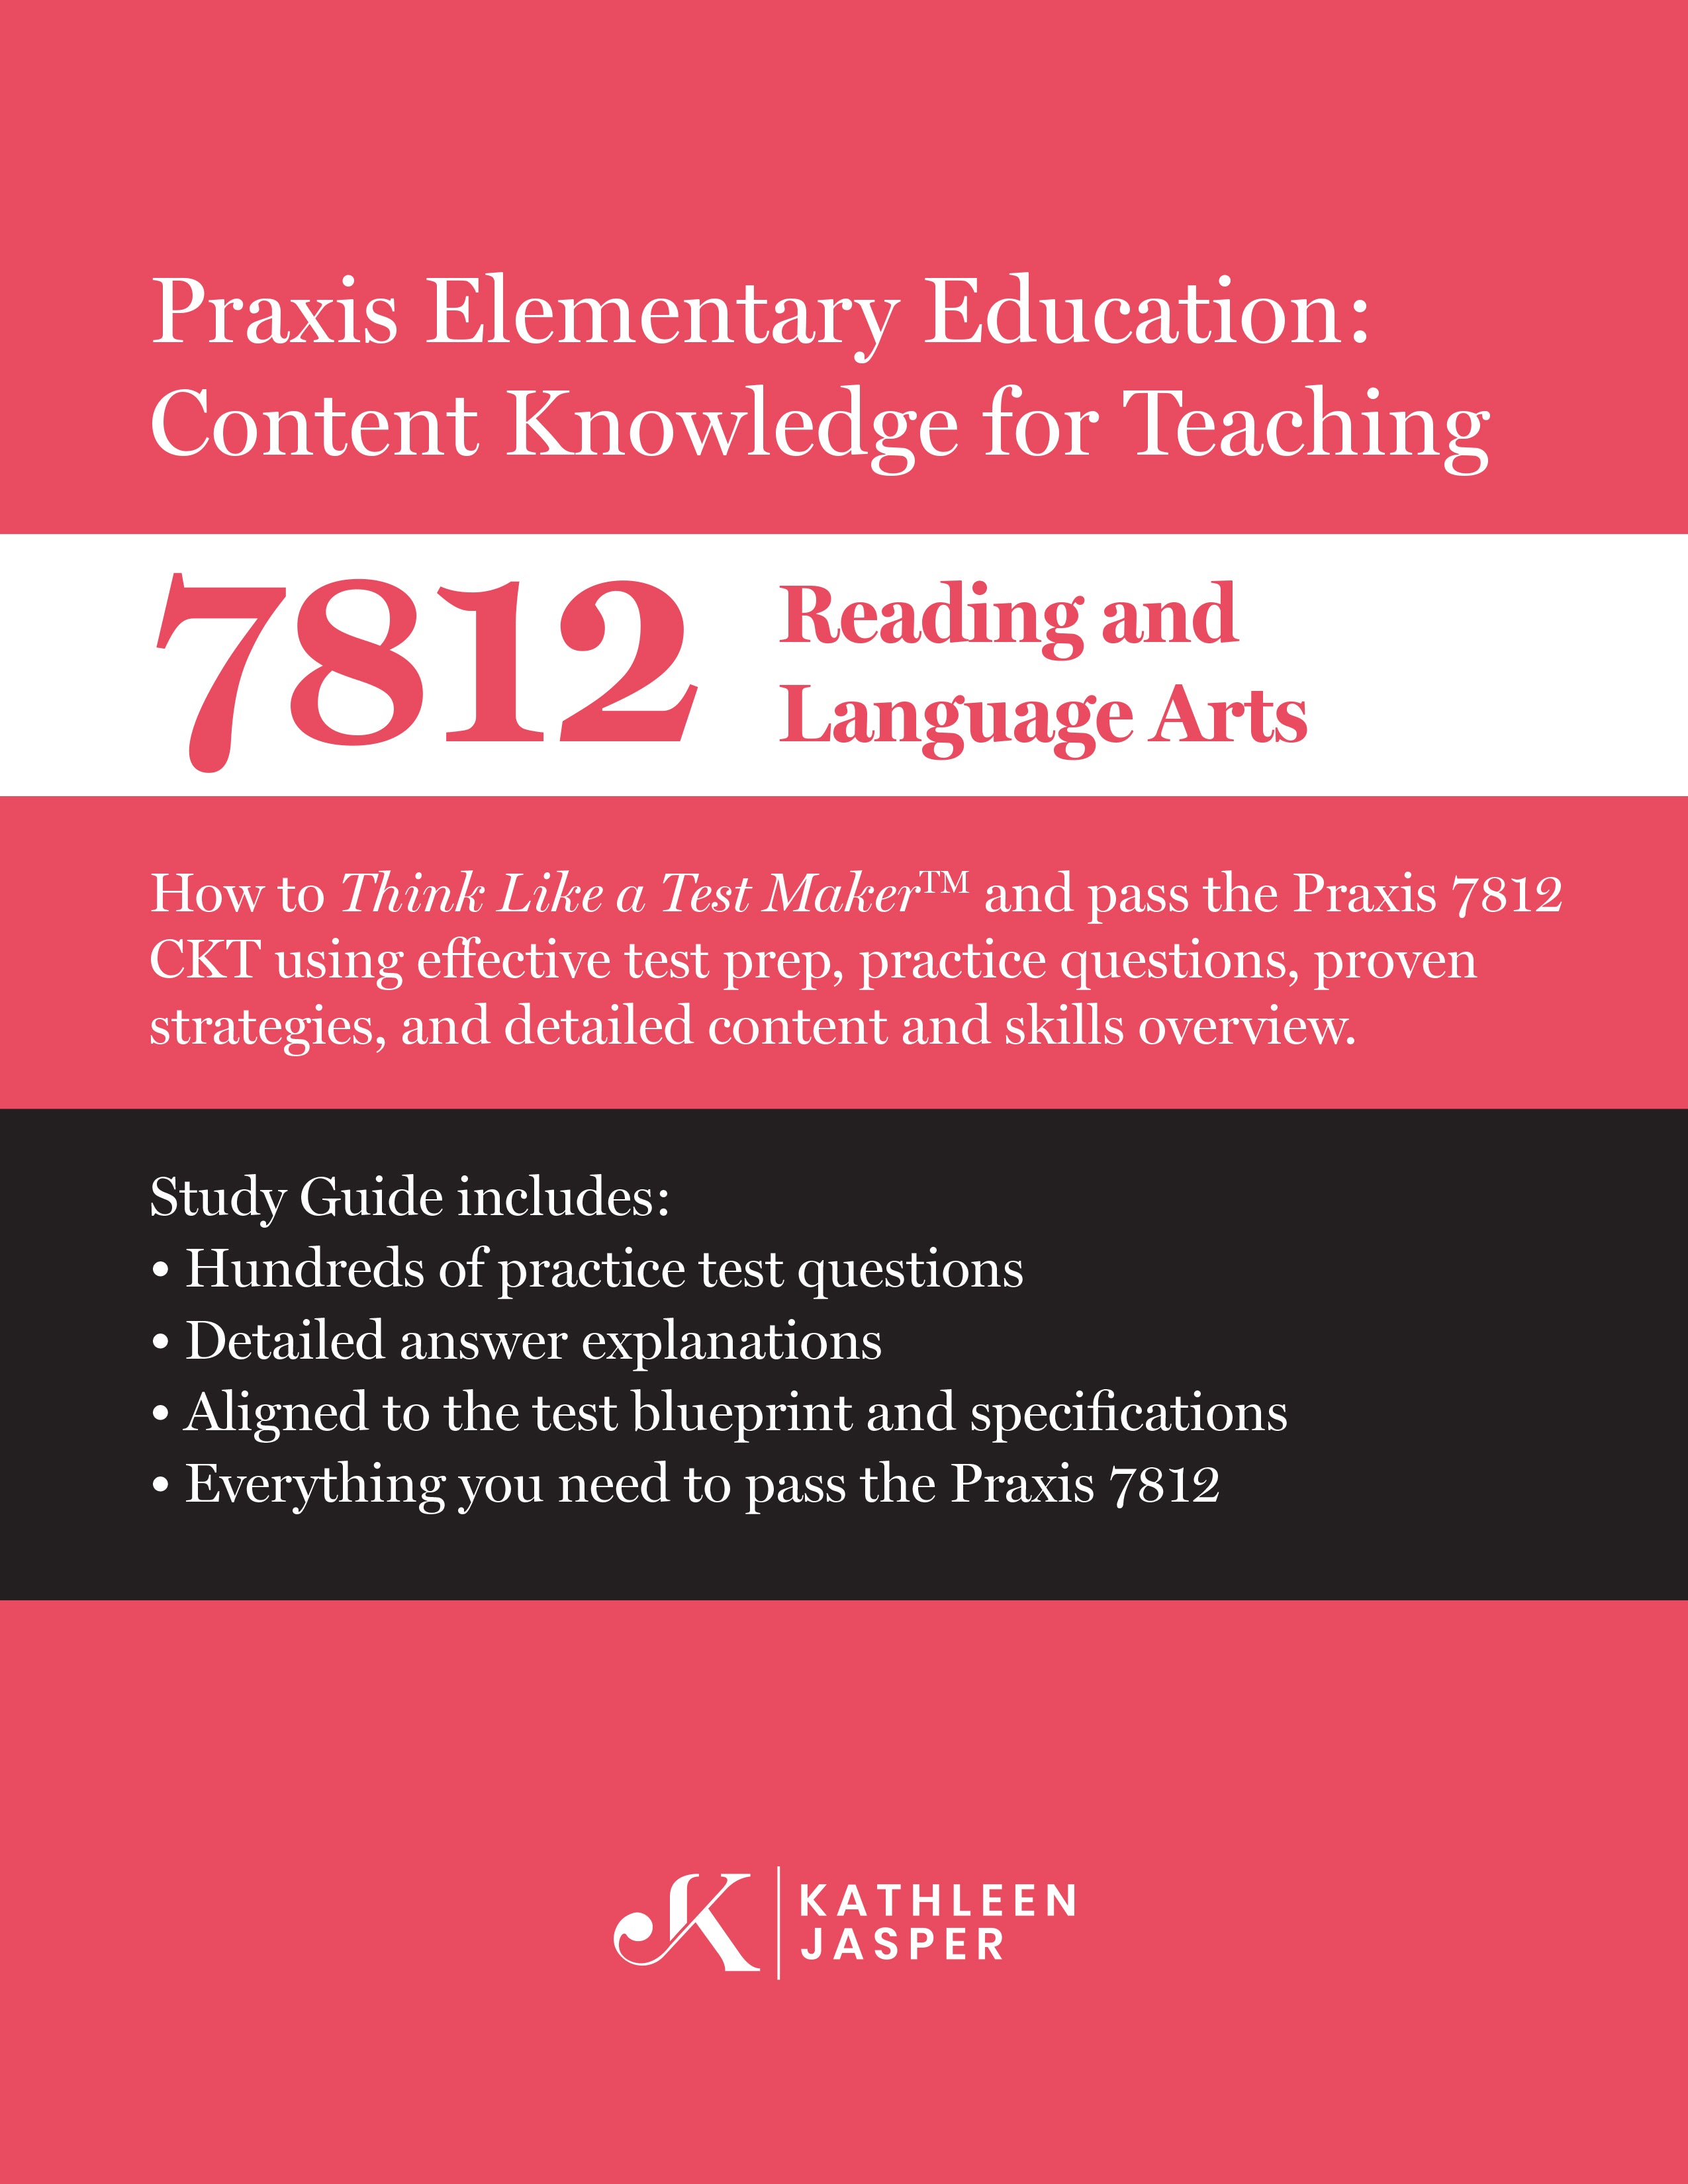 Praxis II Elementary Education Content Knowledge for Teaching (CKT) 7812 - Reading & Language Arts